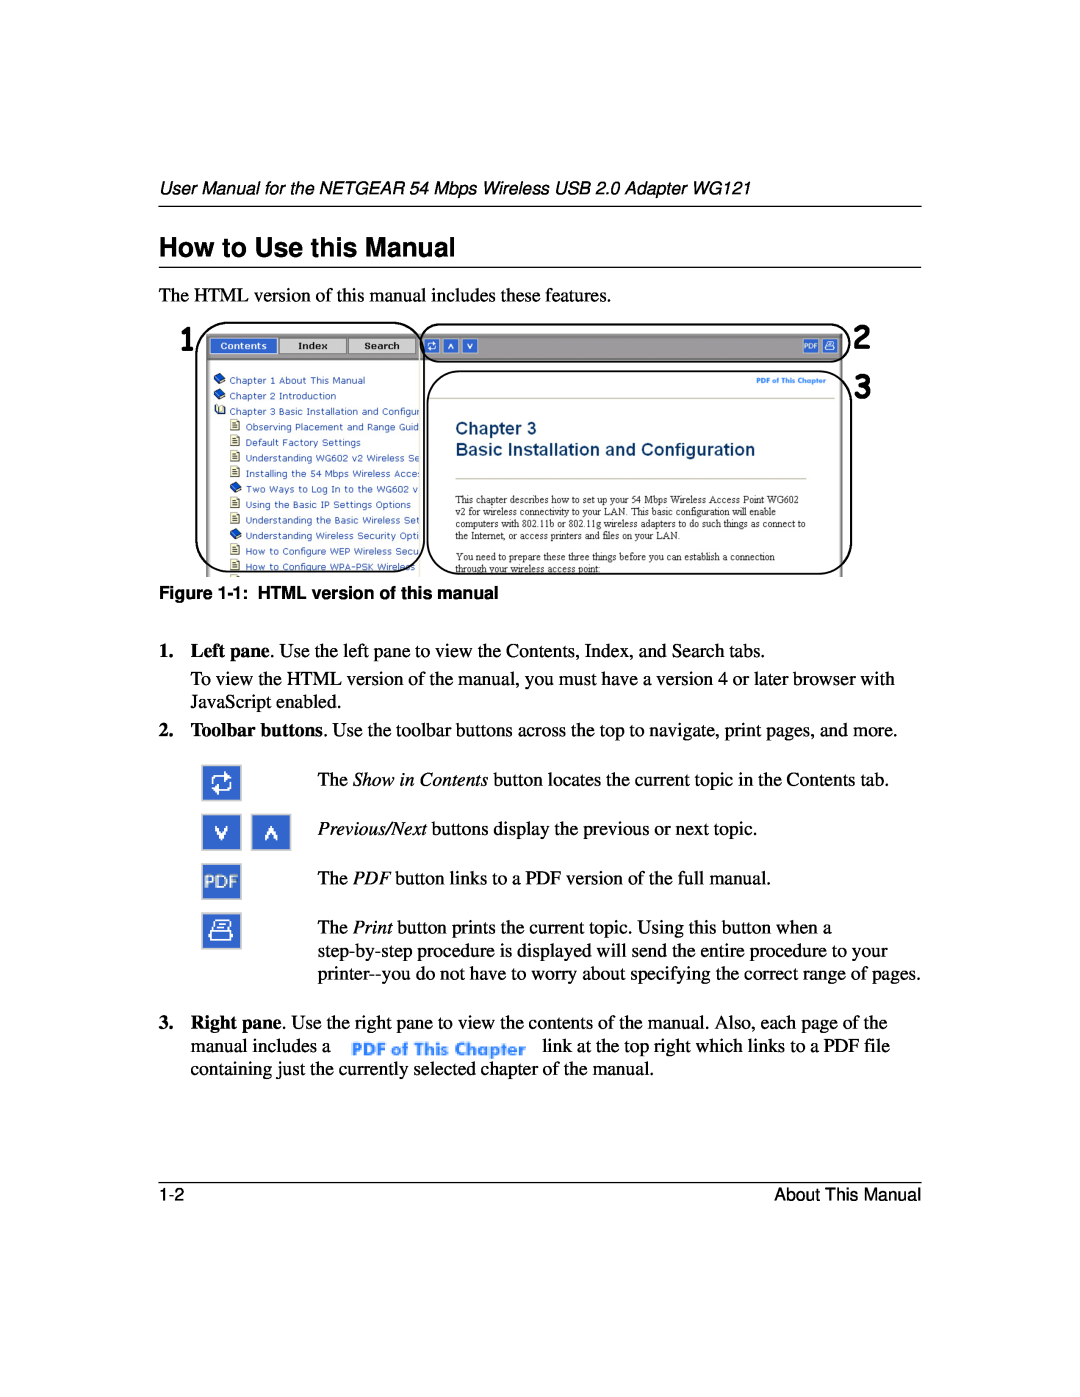 NETGEAR WG121 user manual How to Use this Manual 